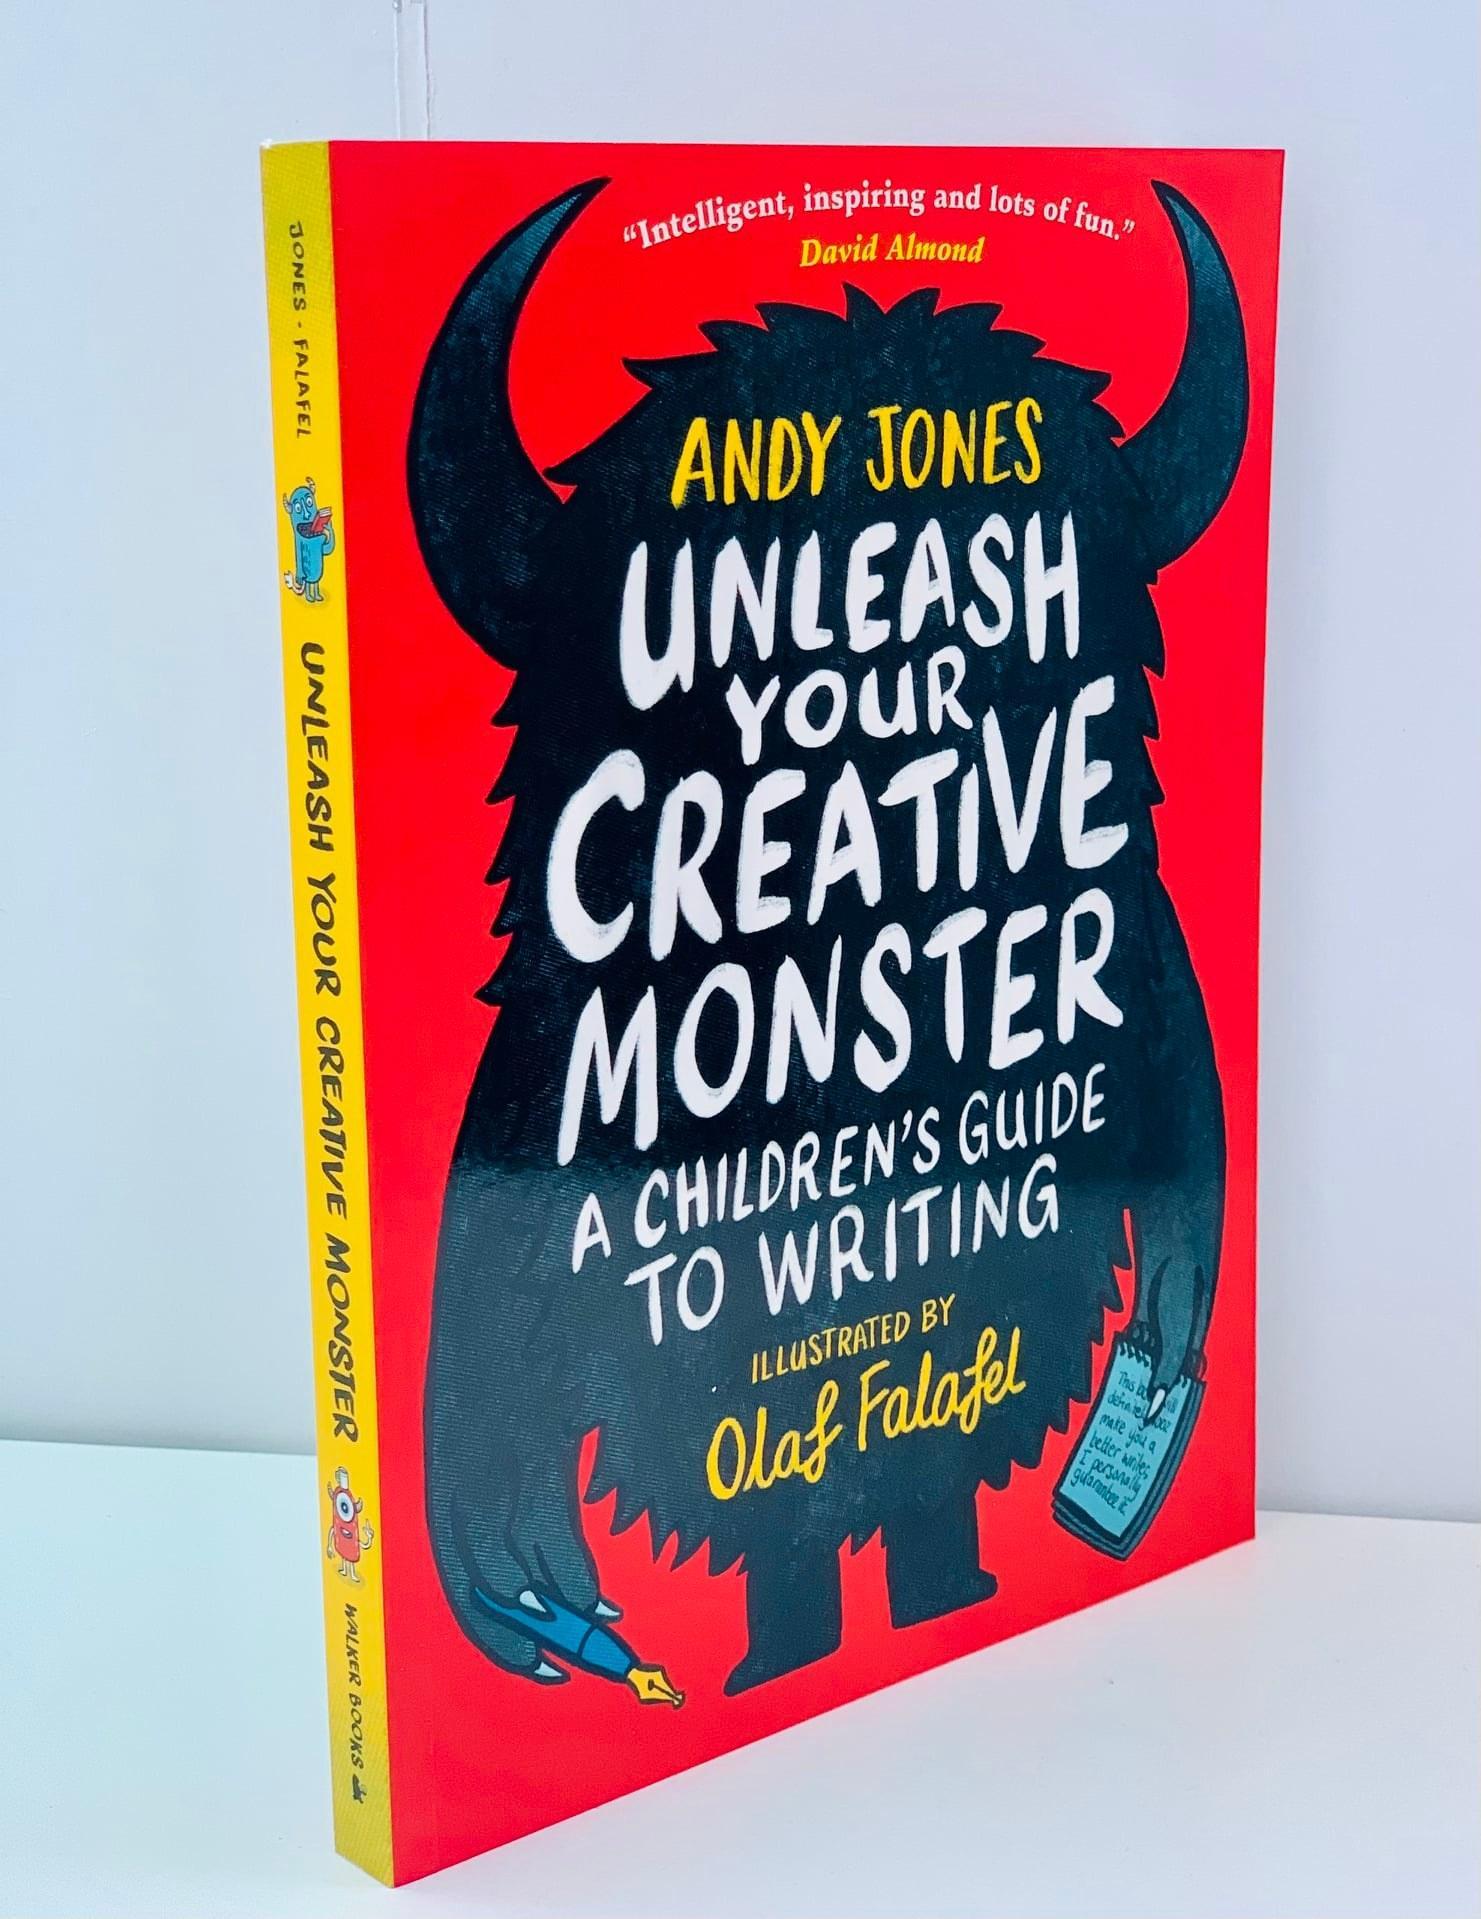 Unleash Your Creative Monster: A Children's Guide to Writing